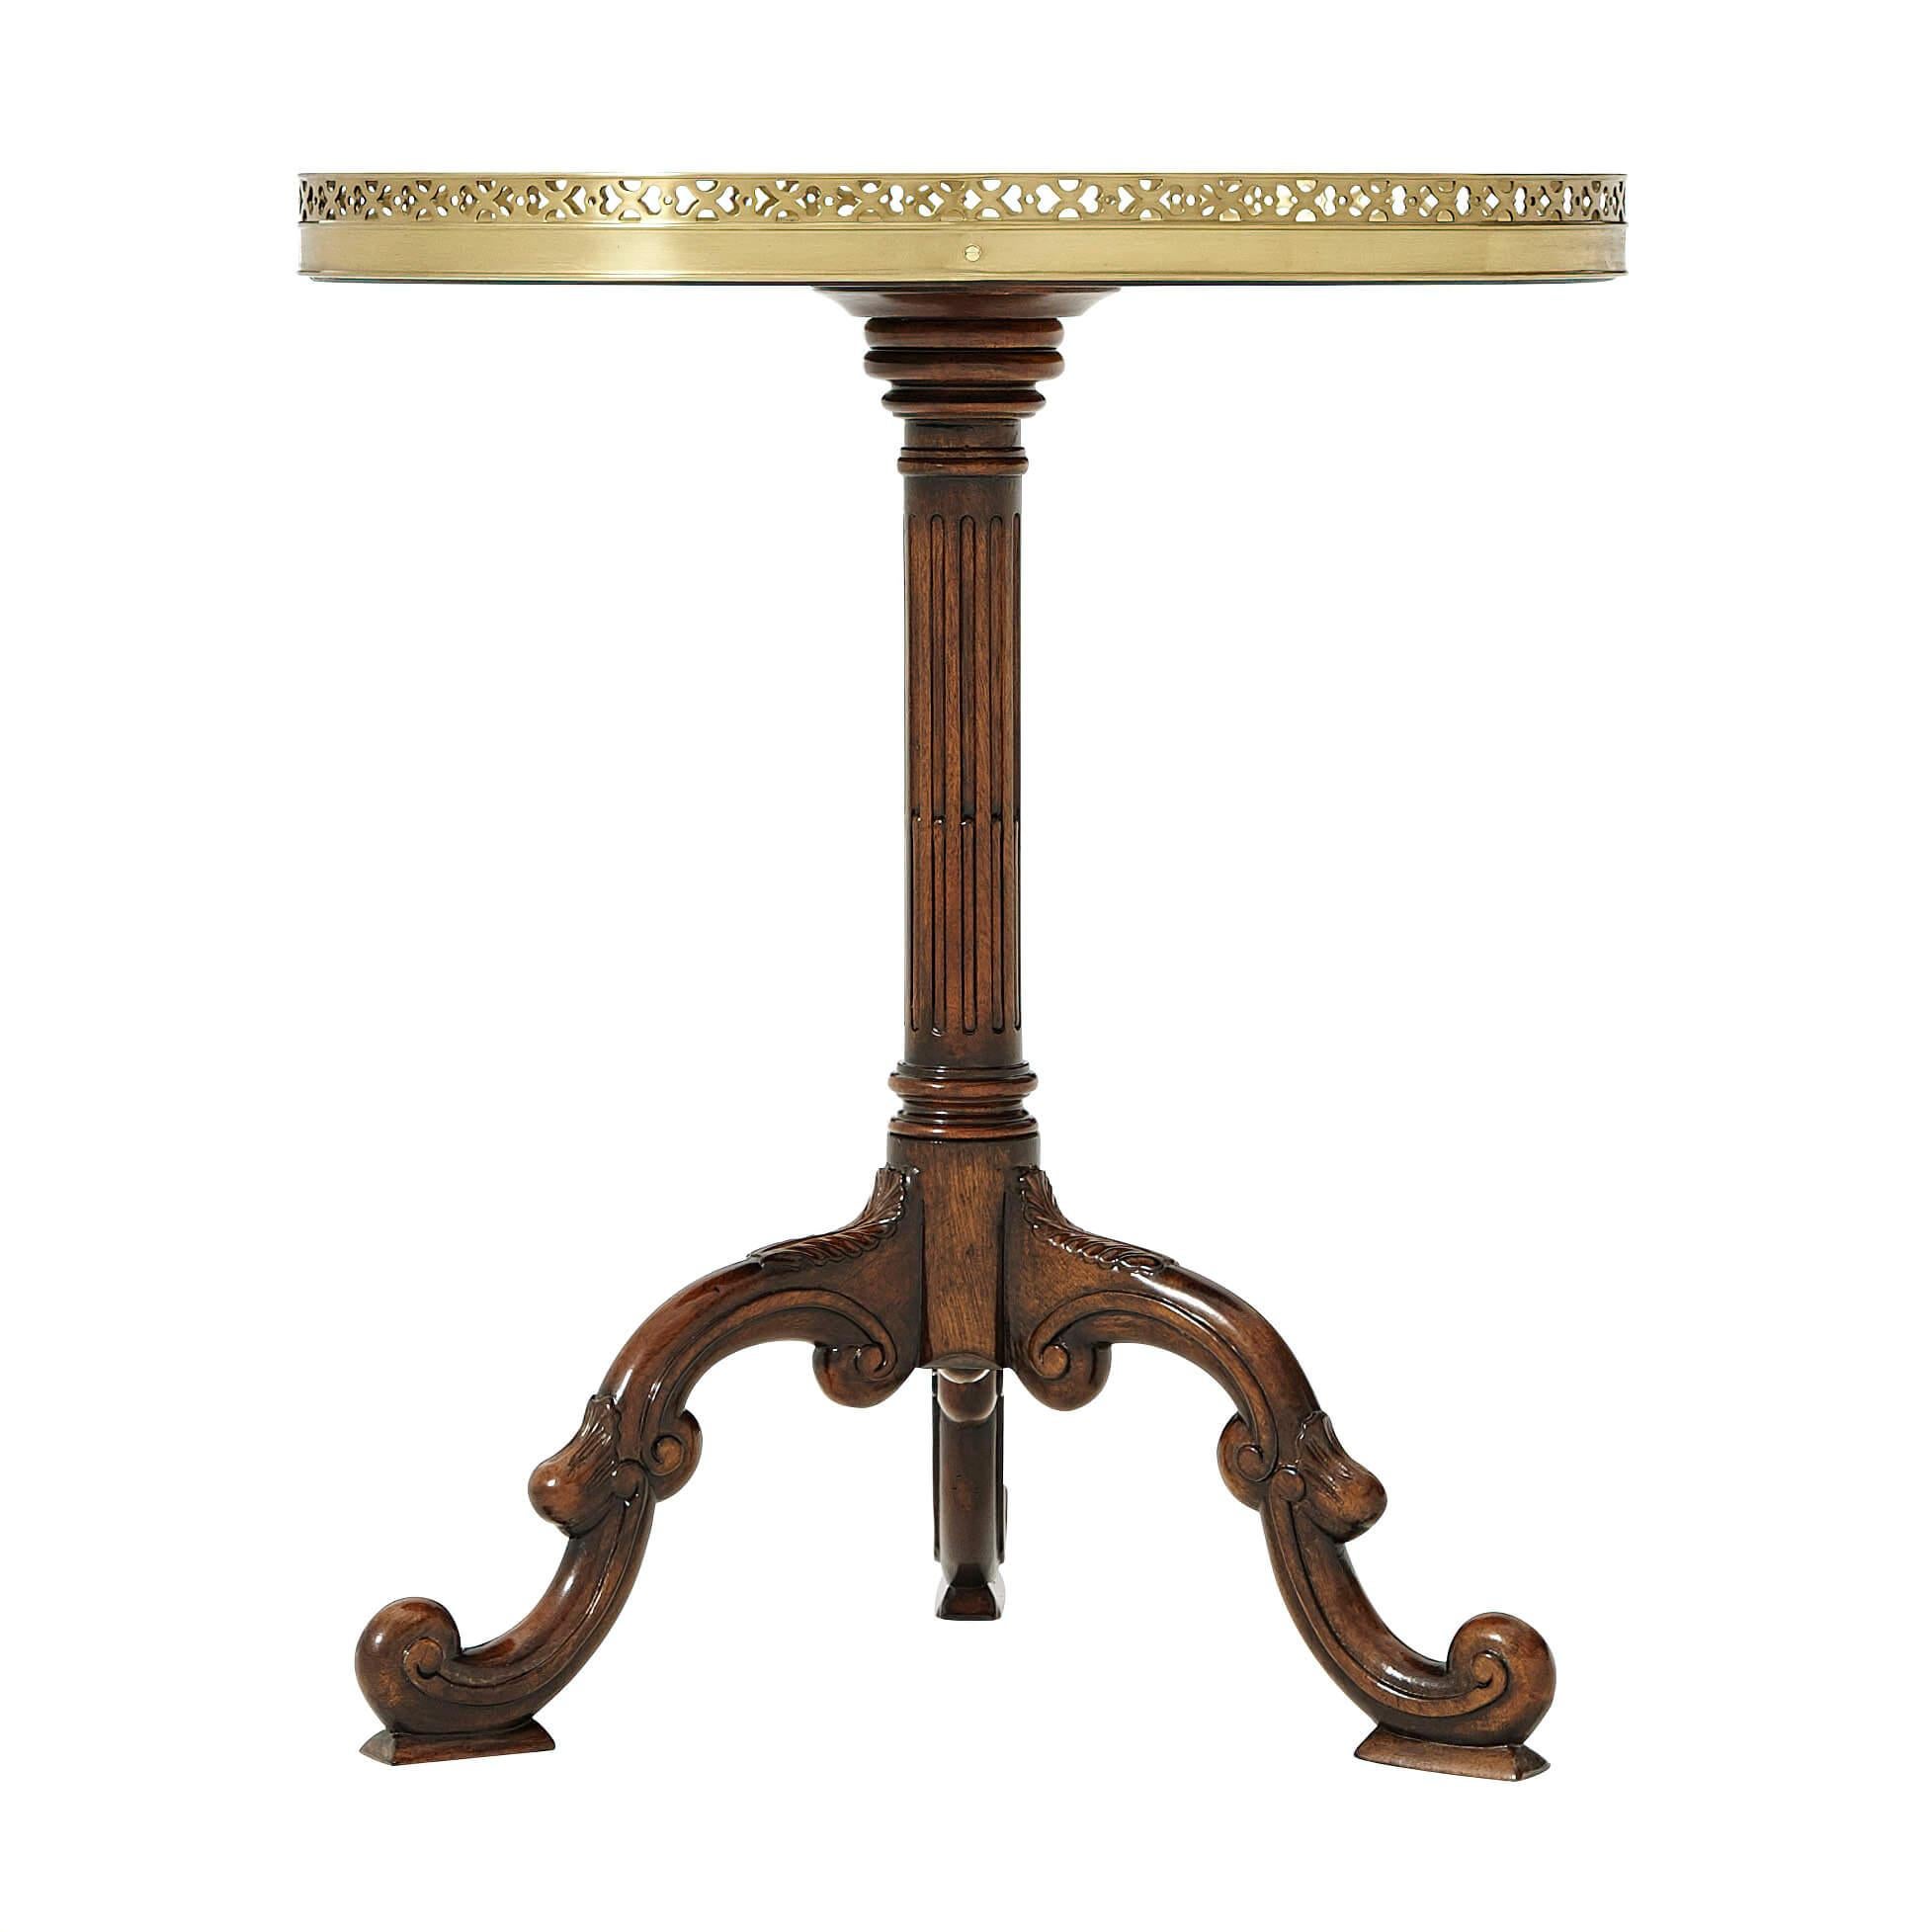 An English mahogany and burl sunburst parquetry oval lamp table, with a pierced brass gallery and fluted column, on 